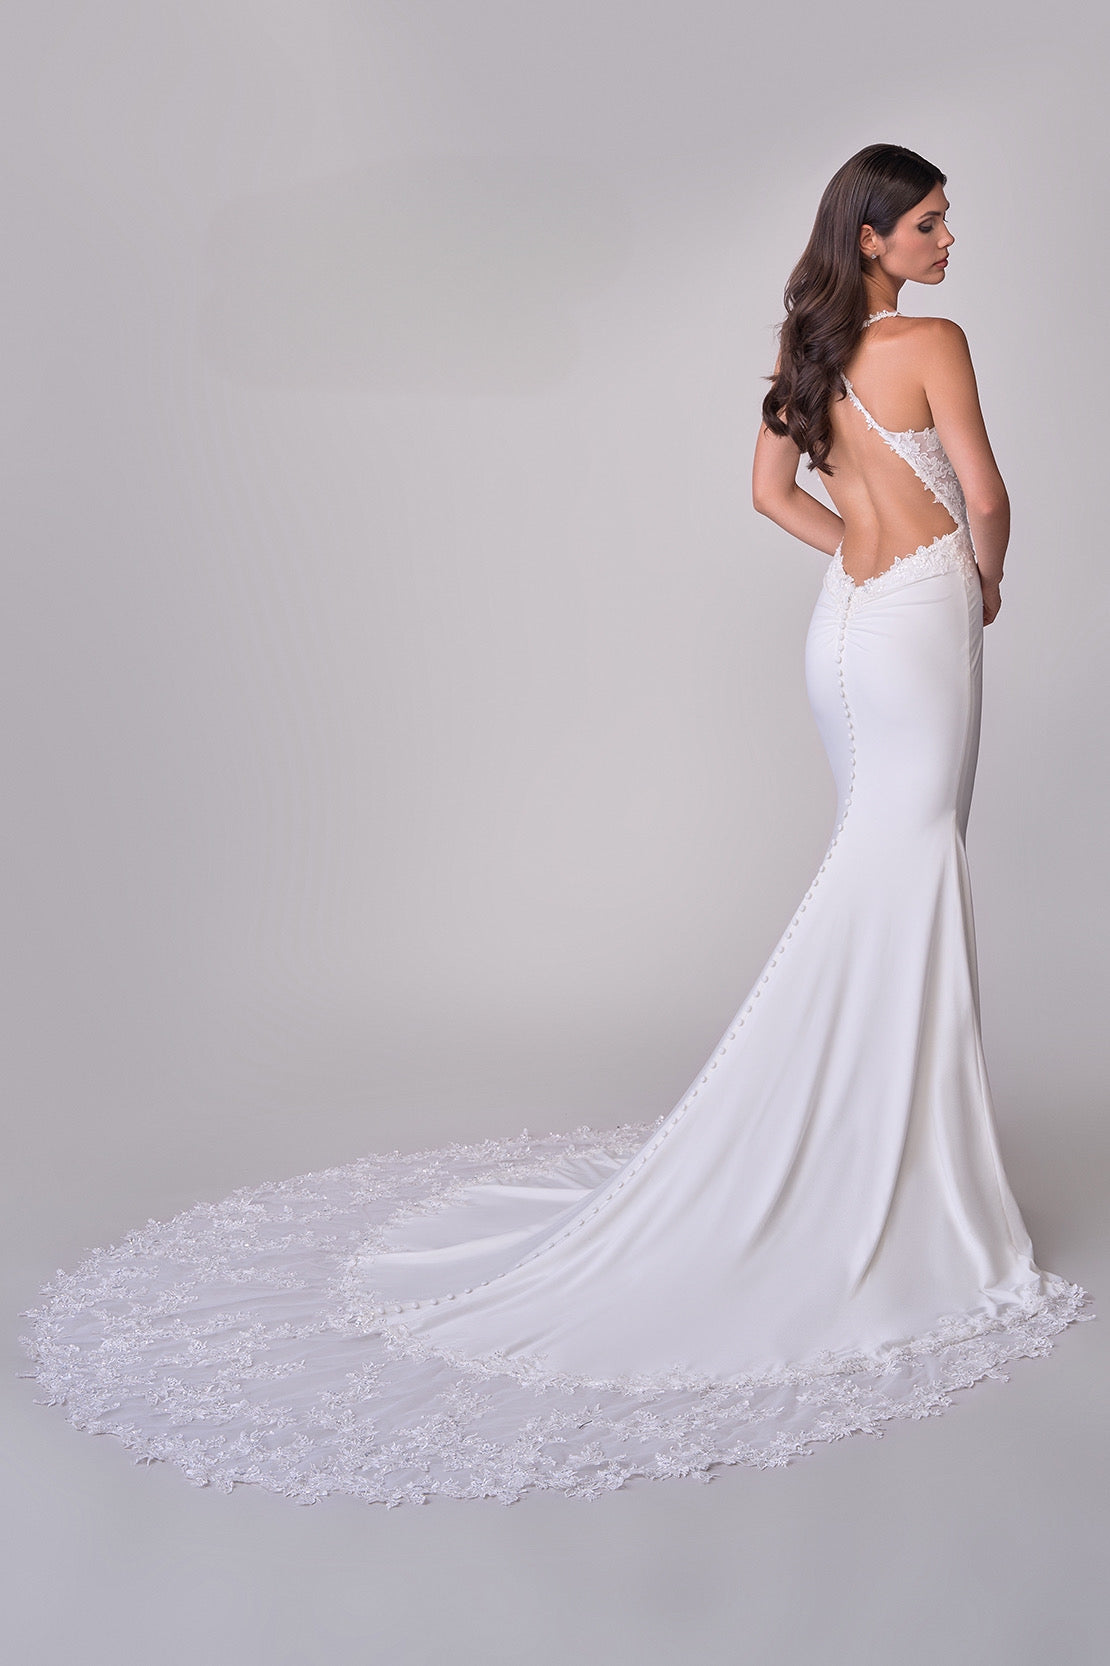 Joelle Olivia by La Femme J2118 Eden Luxe Jersey Wedding Dress - A modern and elegant wedding dress with illusion lace bodice and open low back in ivory.